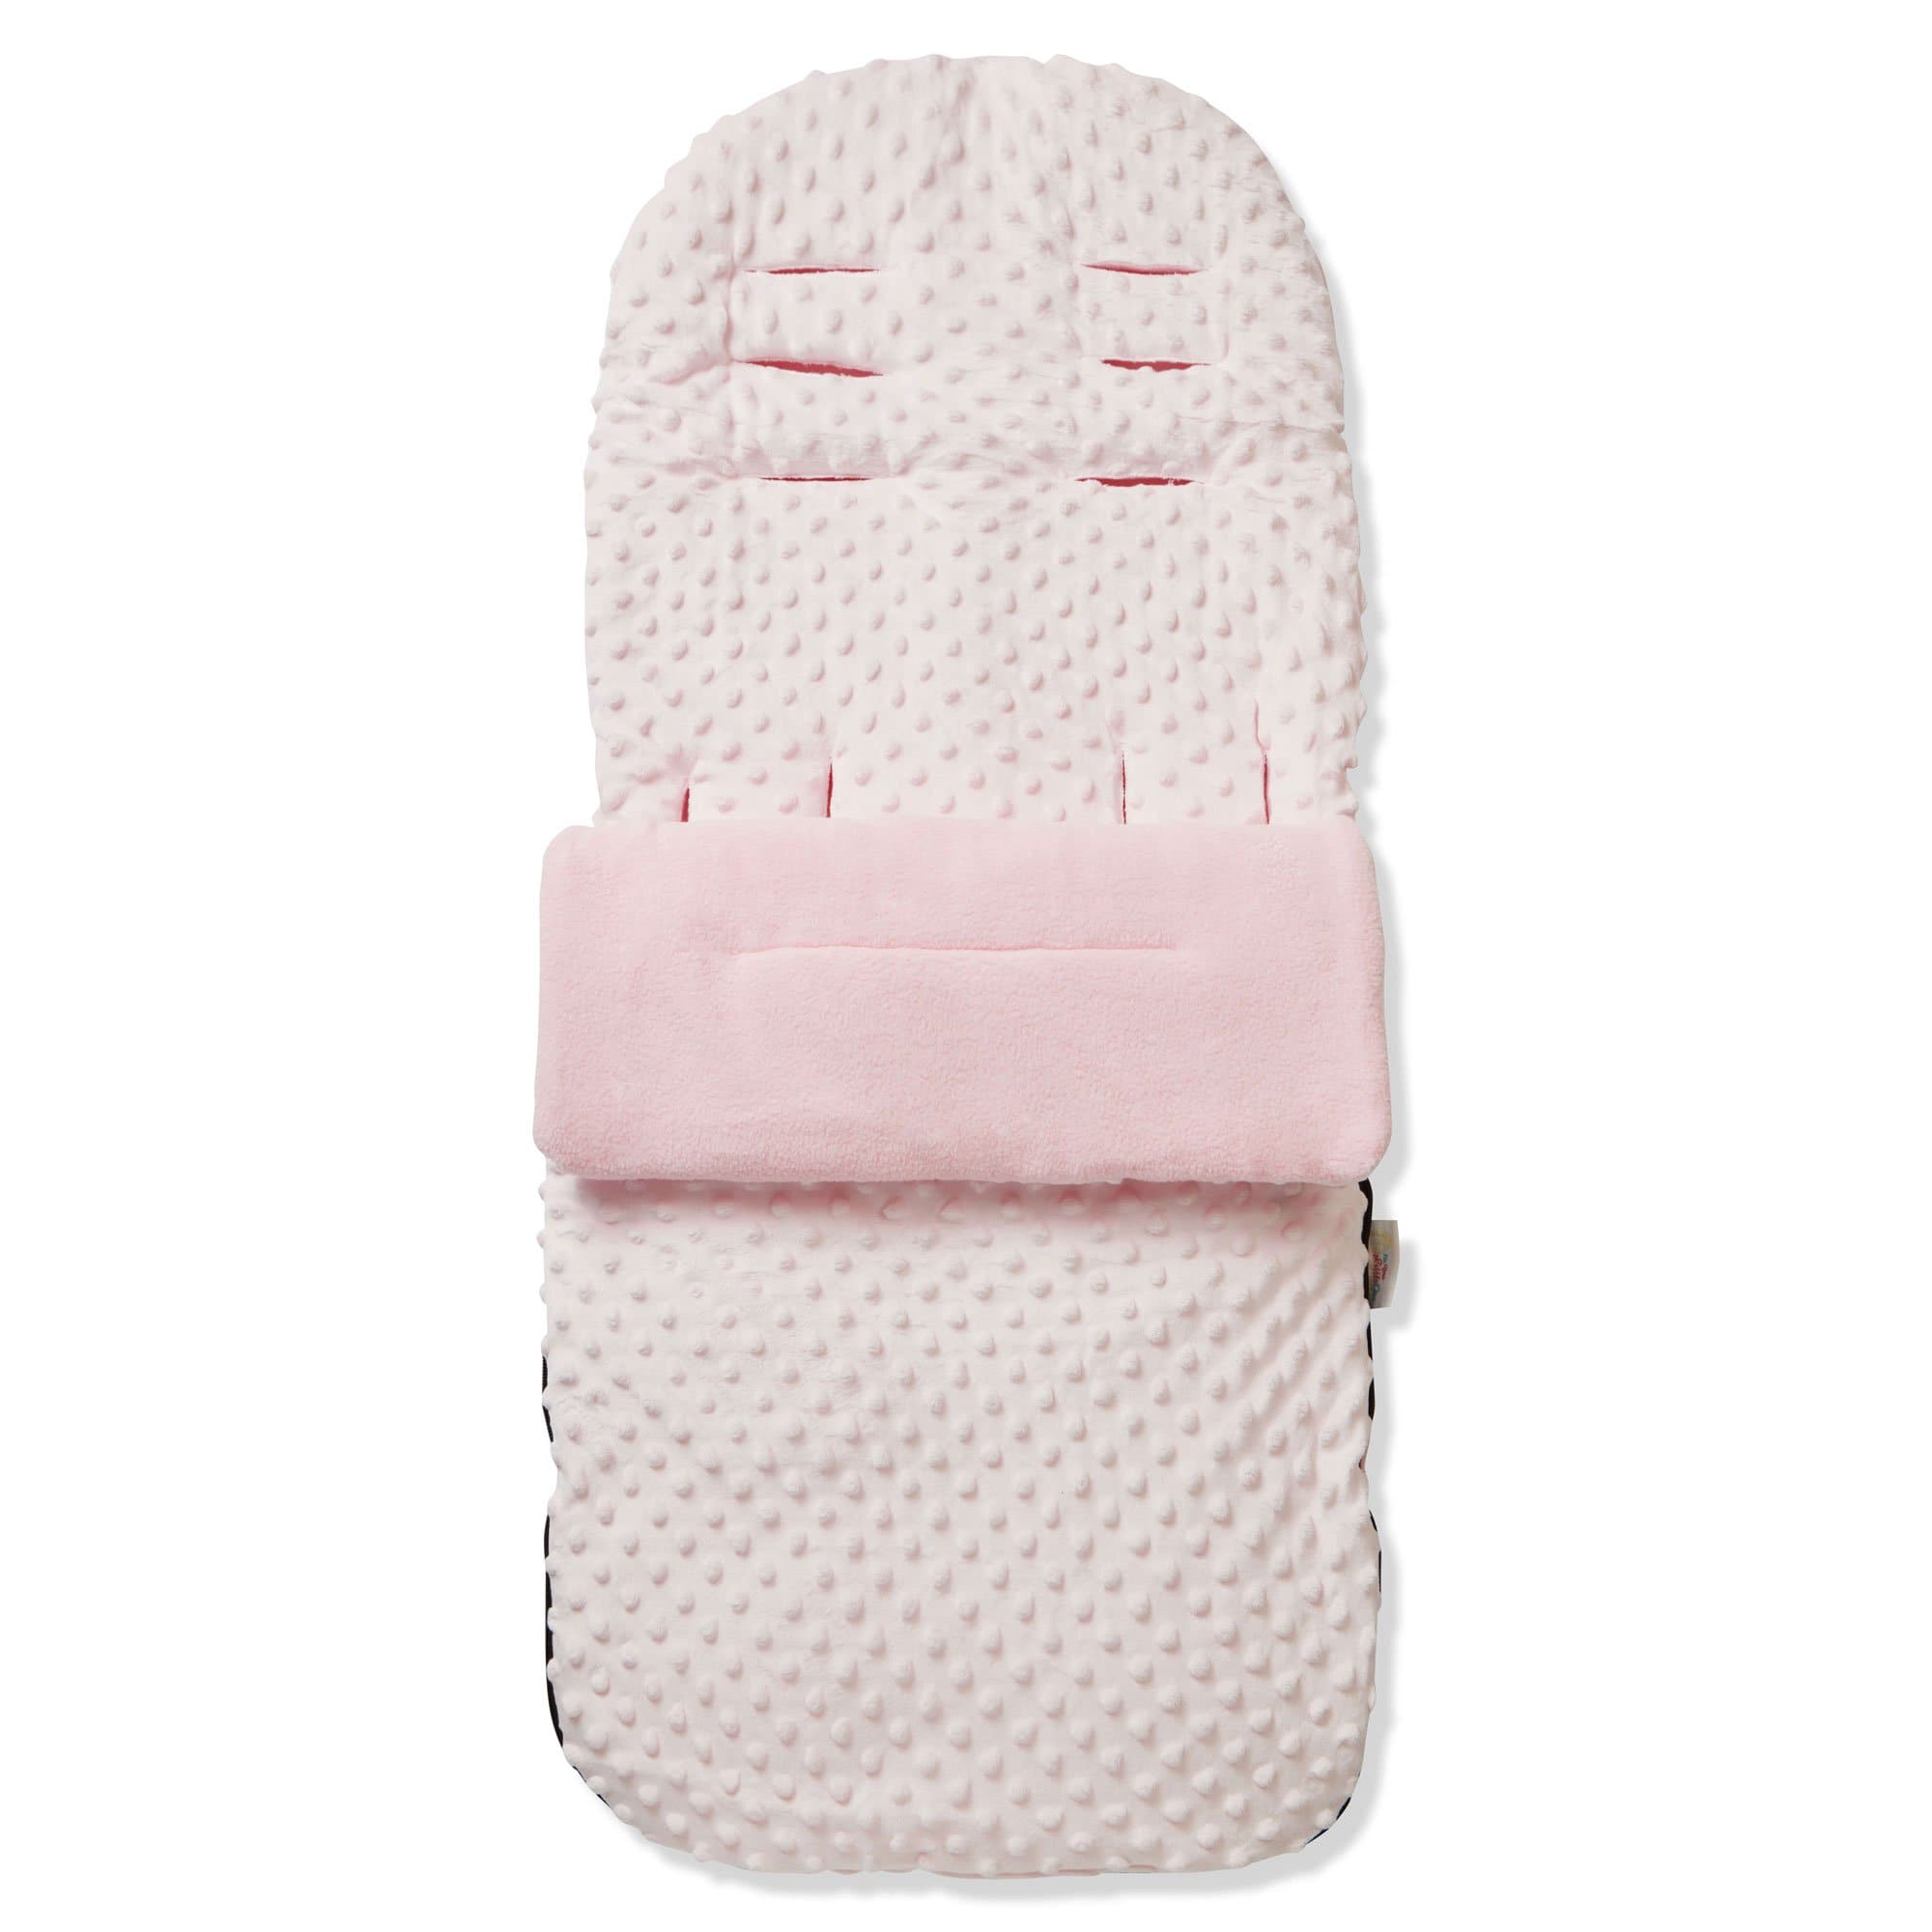 Dimple Footmuff / Cosy Toes Compatible with Egg - Pink / Fits All Models | For Your Little One